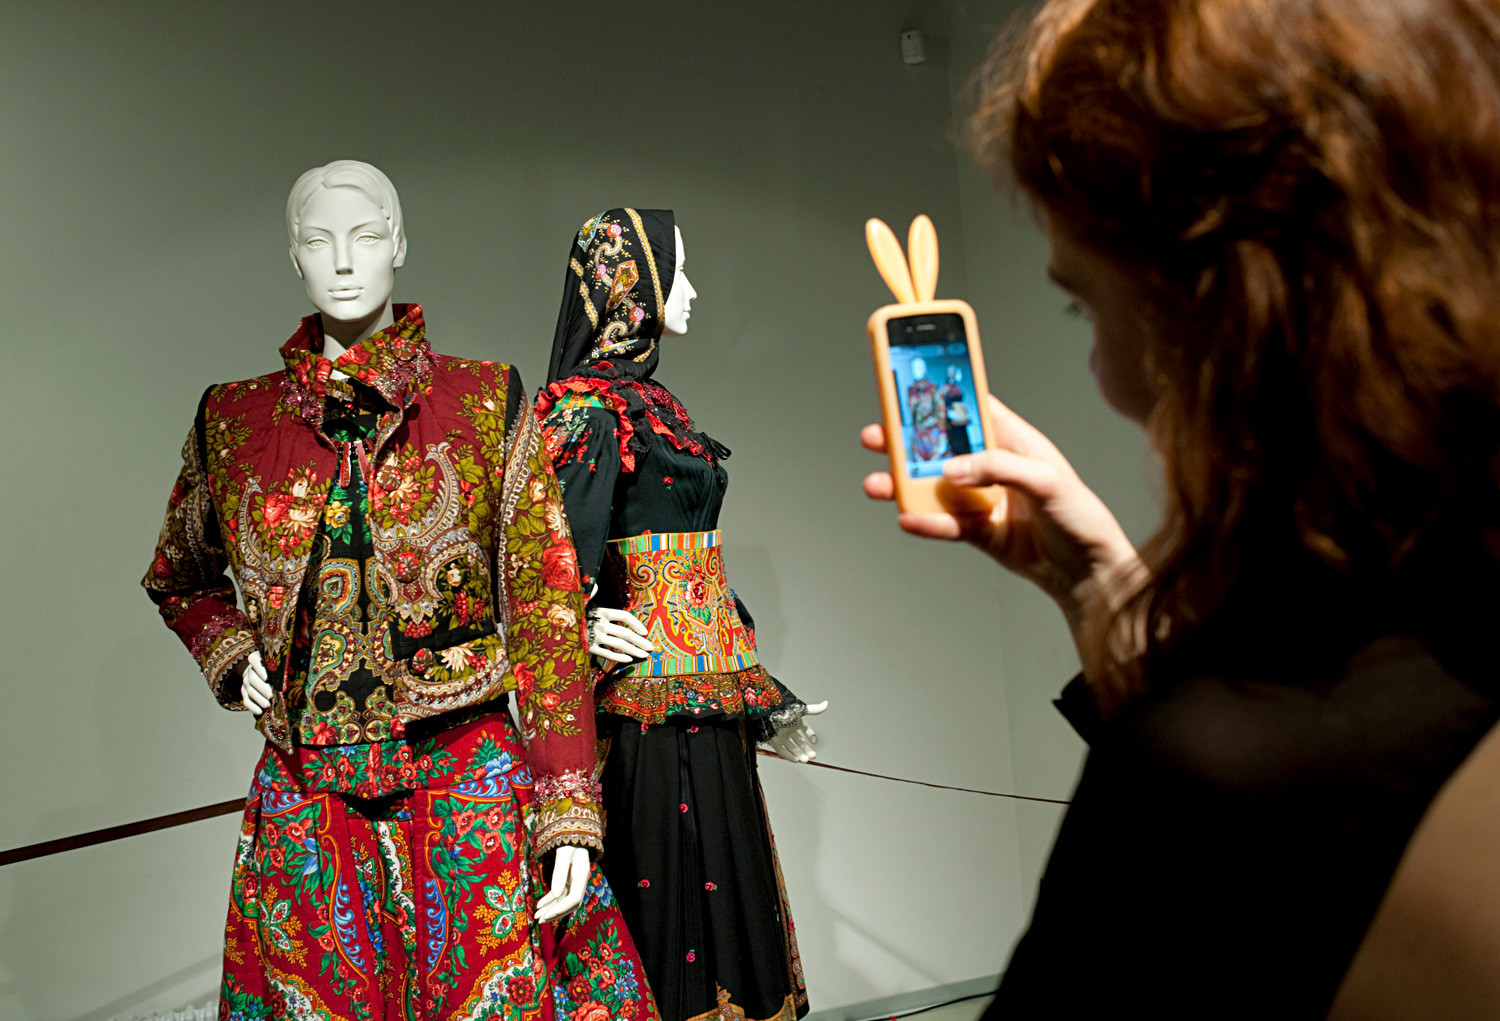 Visitor at the exhibition 'Half a century of fashion' by Slava Zaytsev held at the Museum of Contemporary Art 